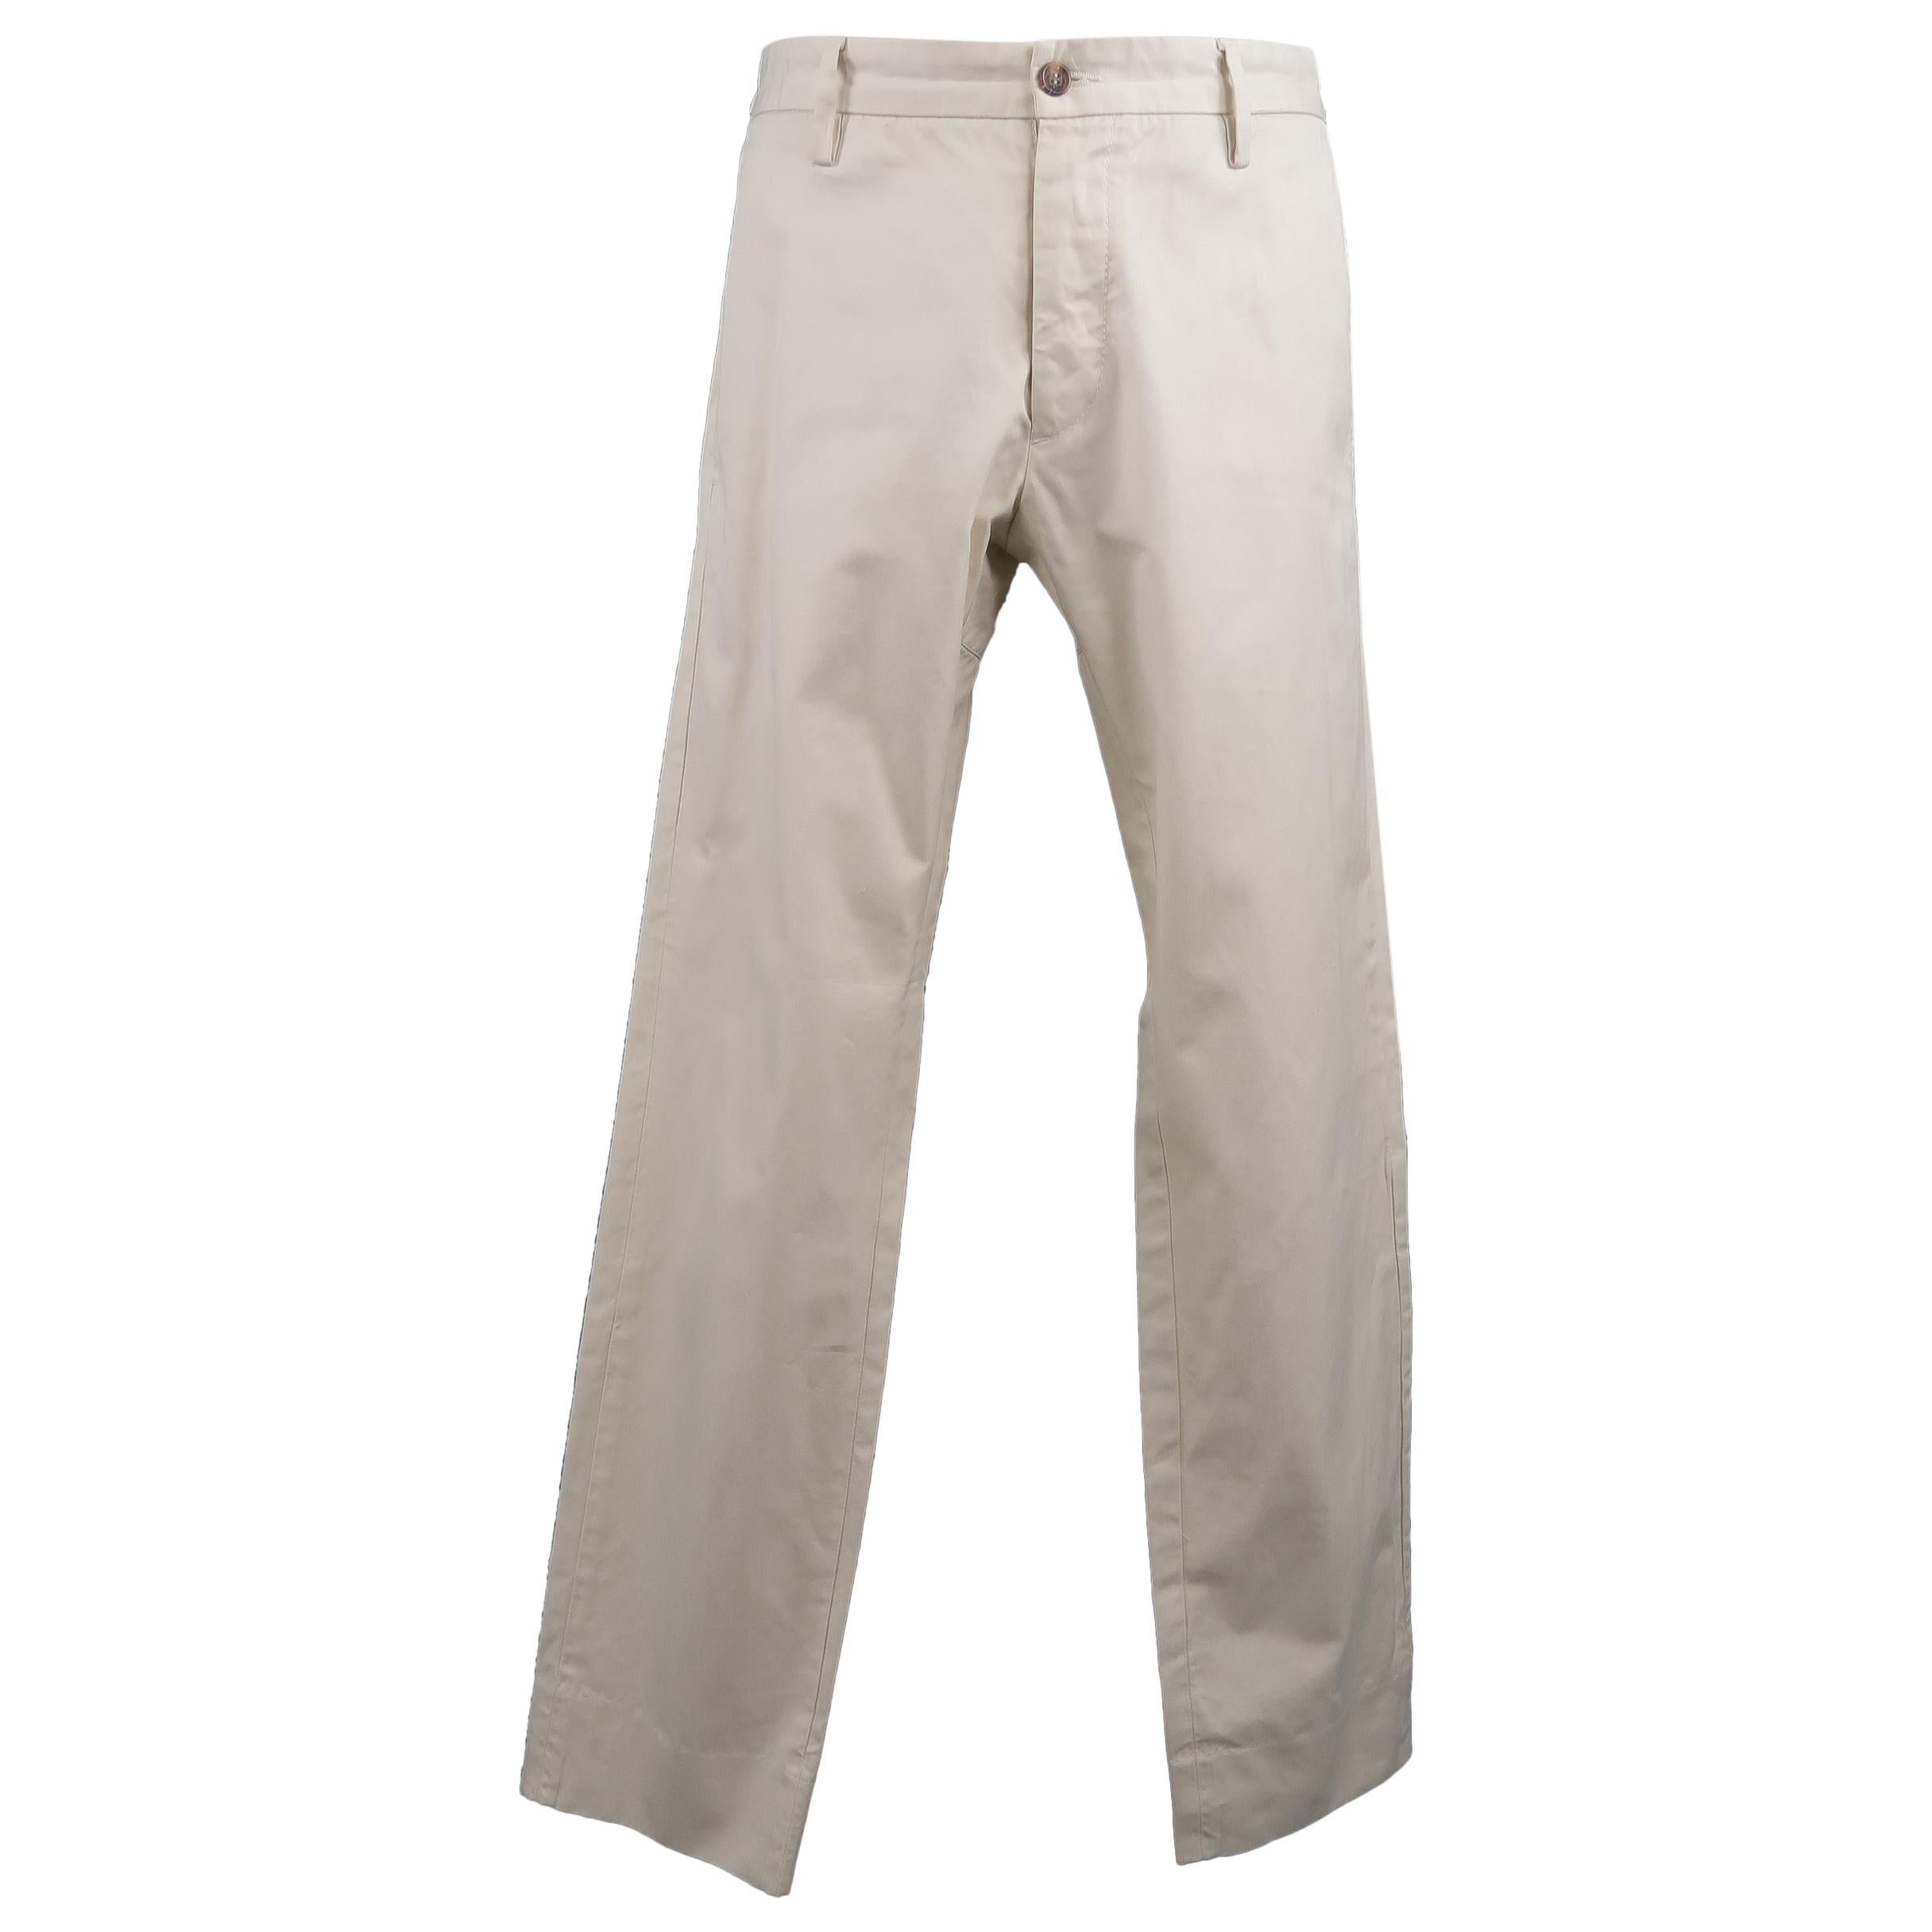 DSQUARED2 Casual solid cream cotton pants with patch details 